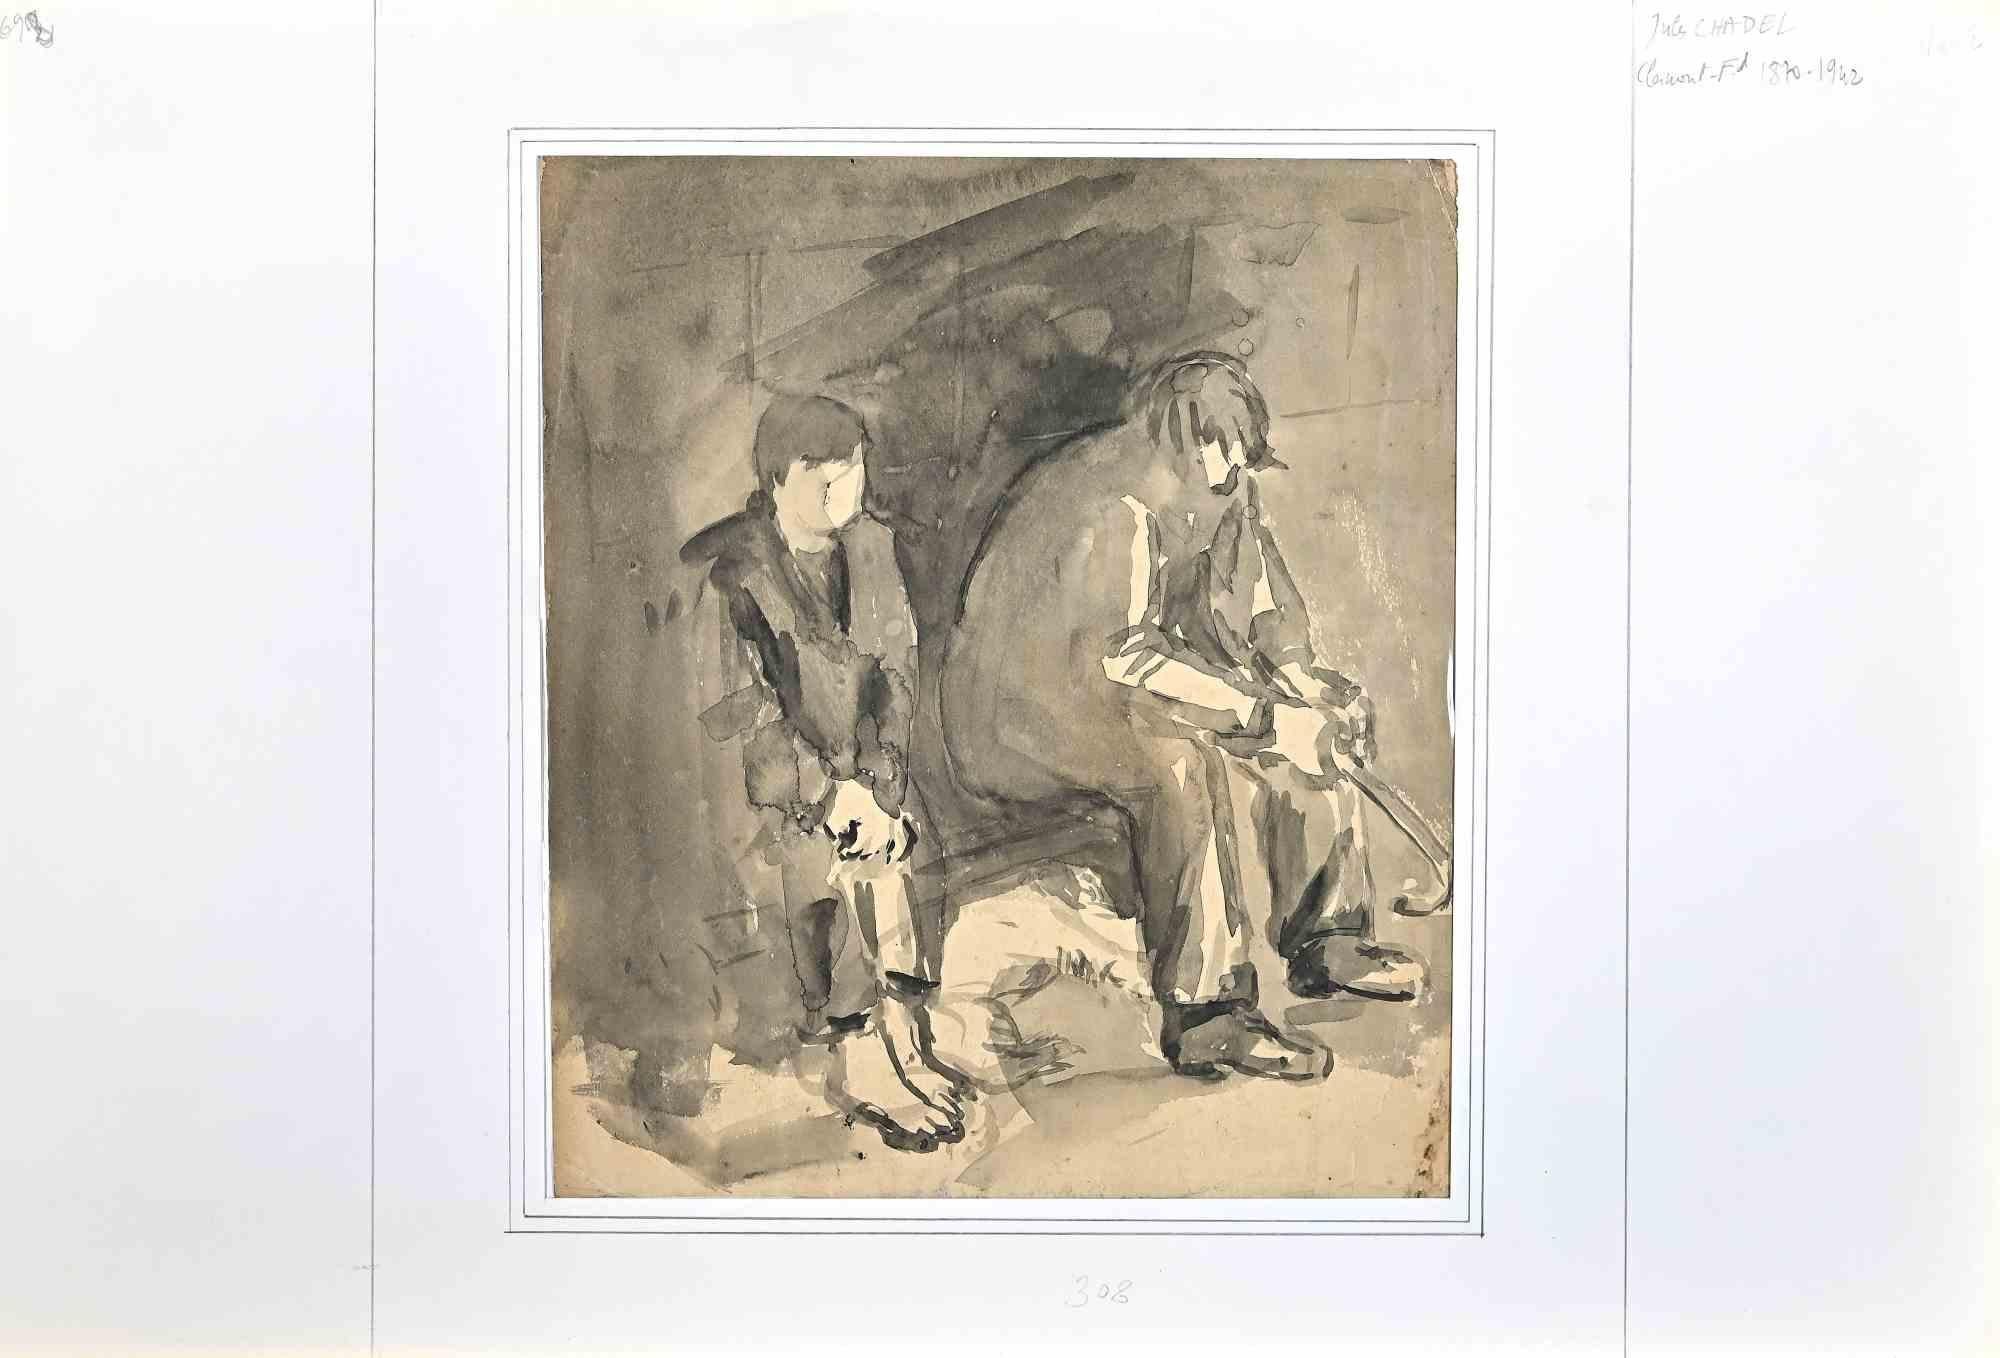 Figures is an original drawing in ink and watercolor realize by Jules Chadel in the Early 20th Century.

Good conditions.

The artwork is represented through soft pencil strokes.
